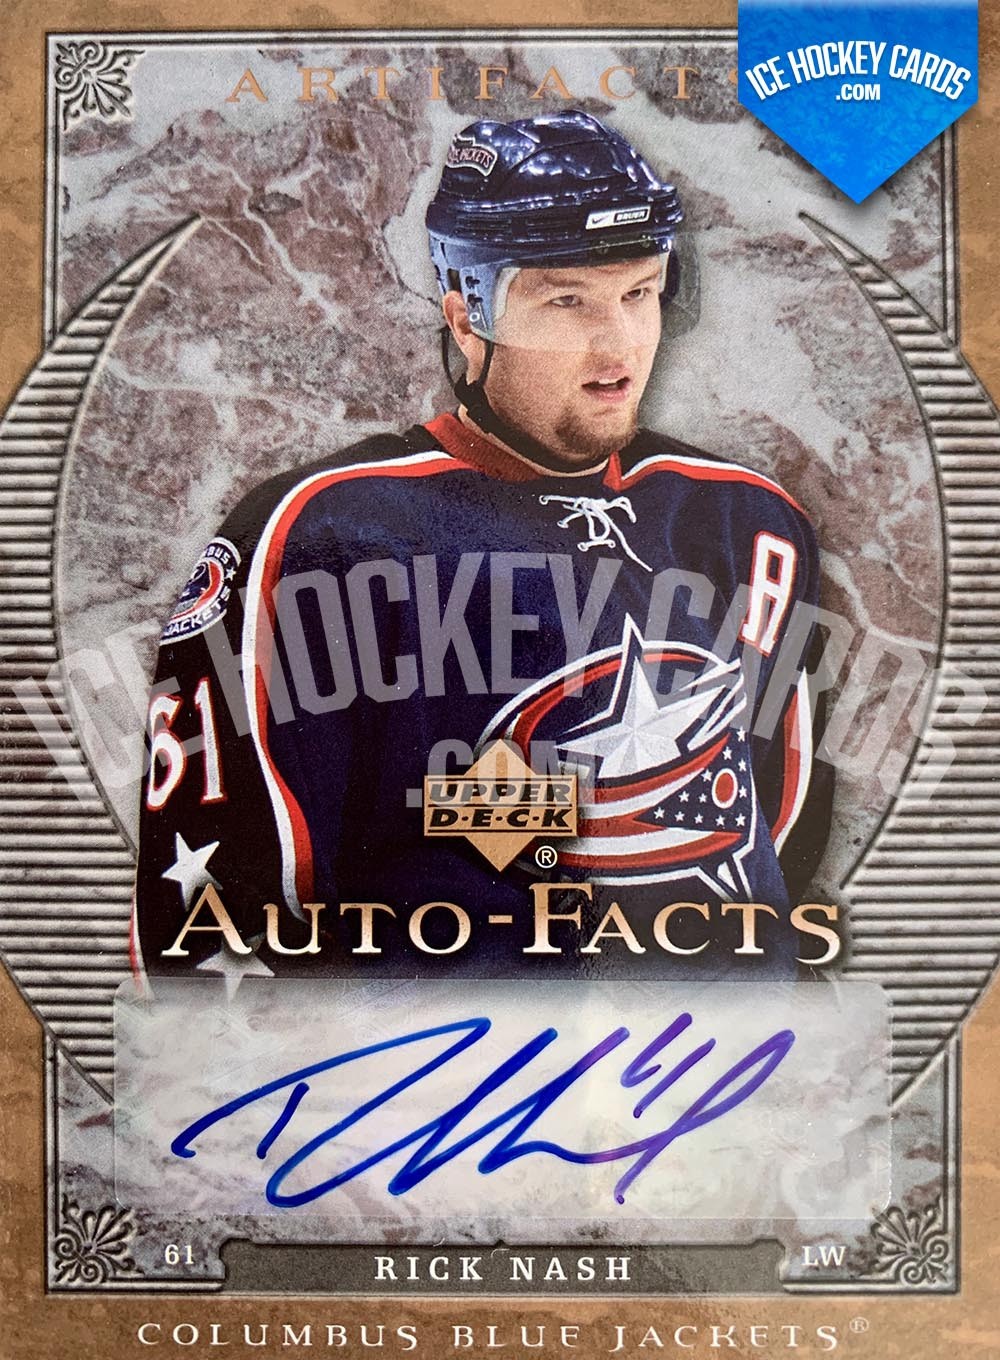 Rick Nash Autographed 2004-05 Upper Deck Hockey Card - NHL Auctions